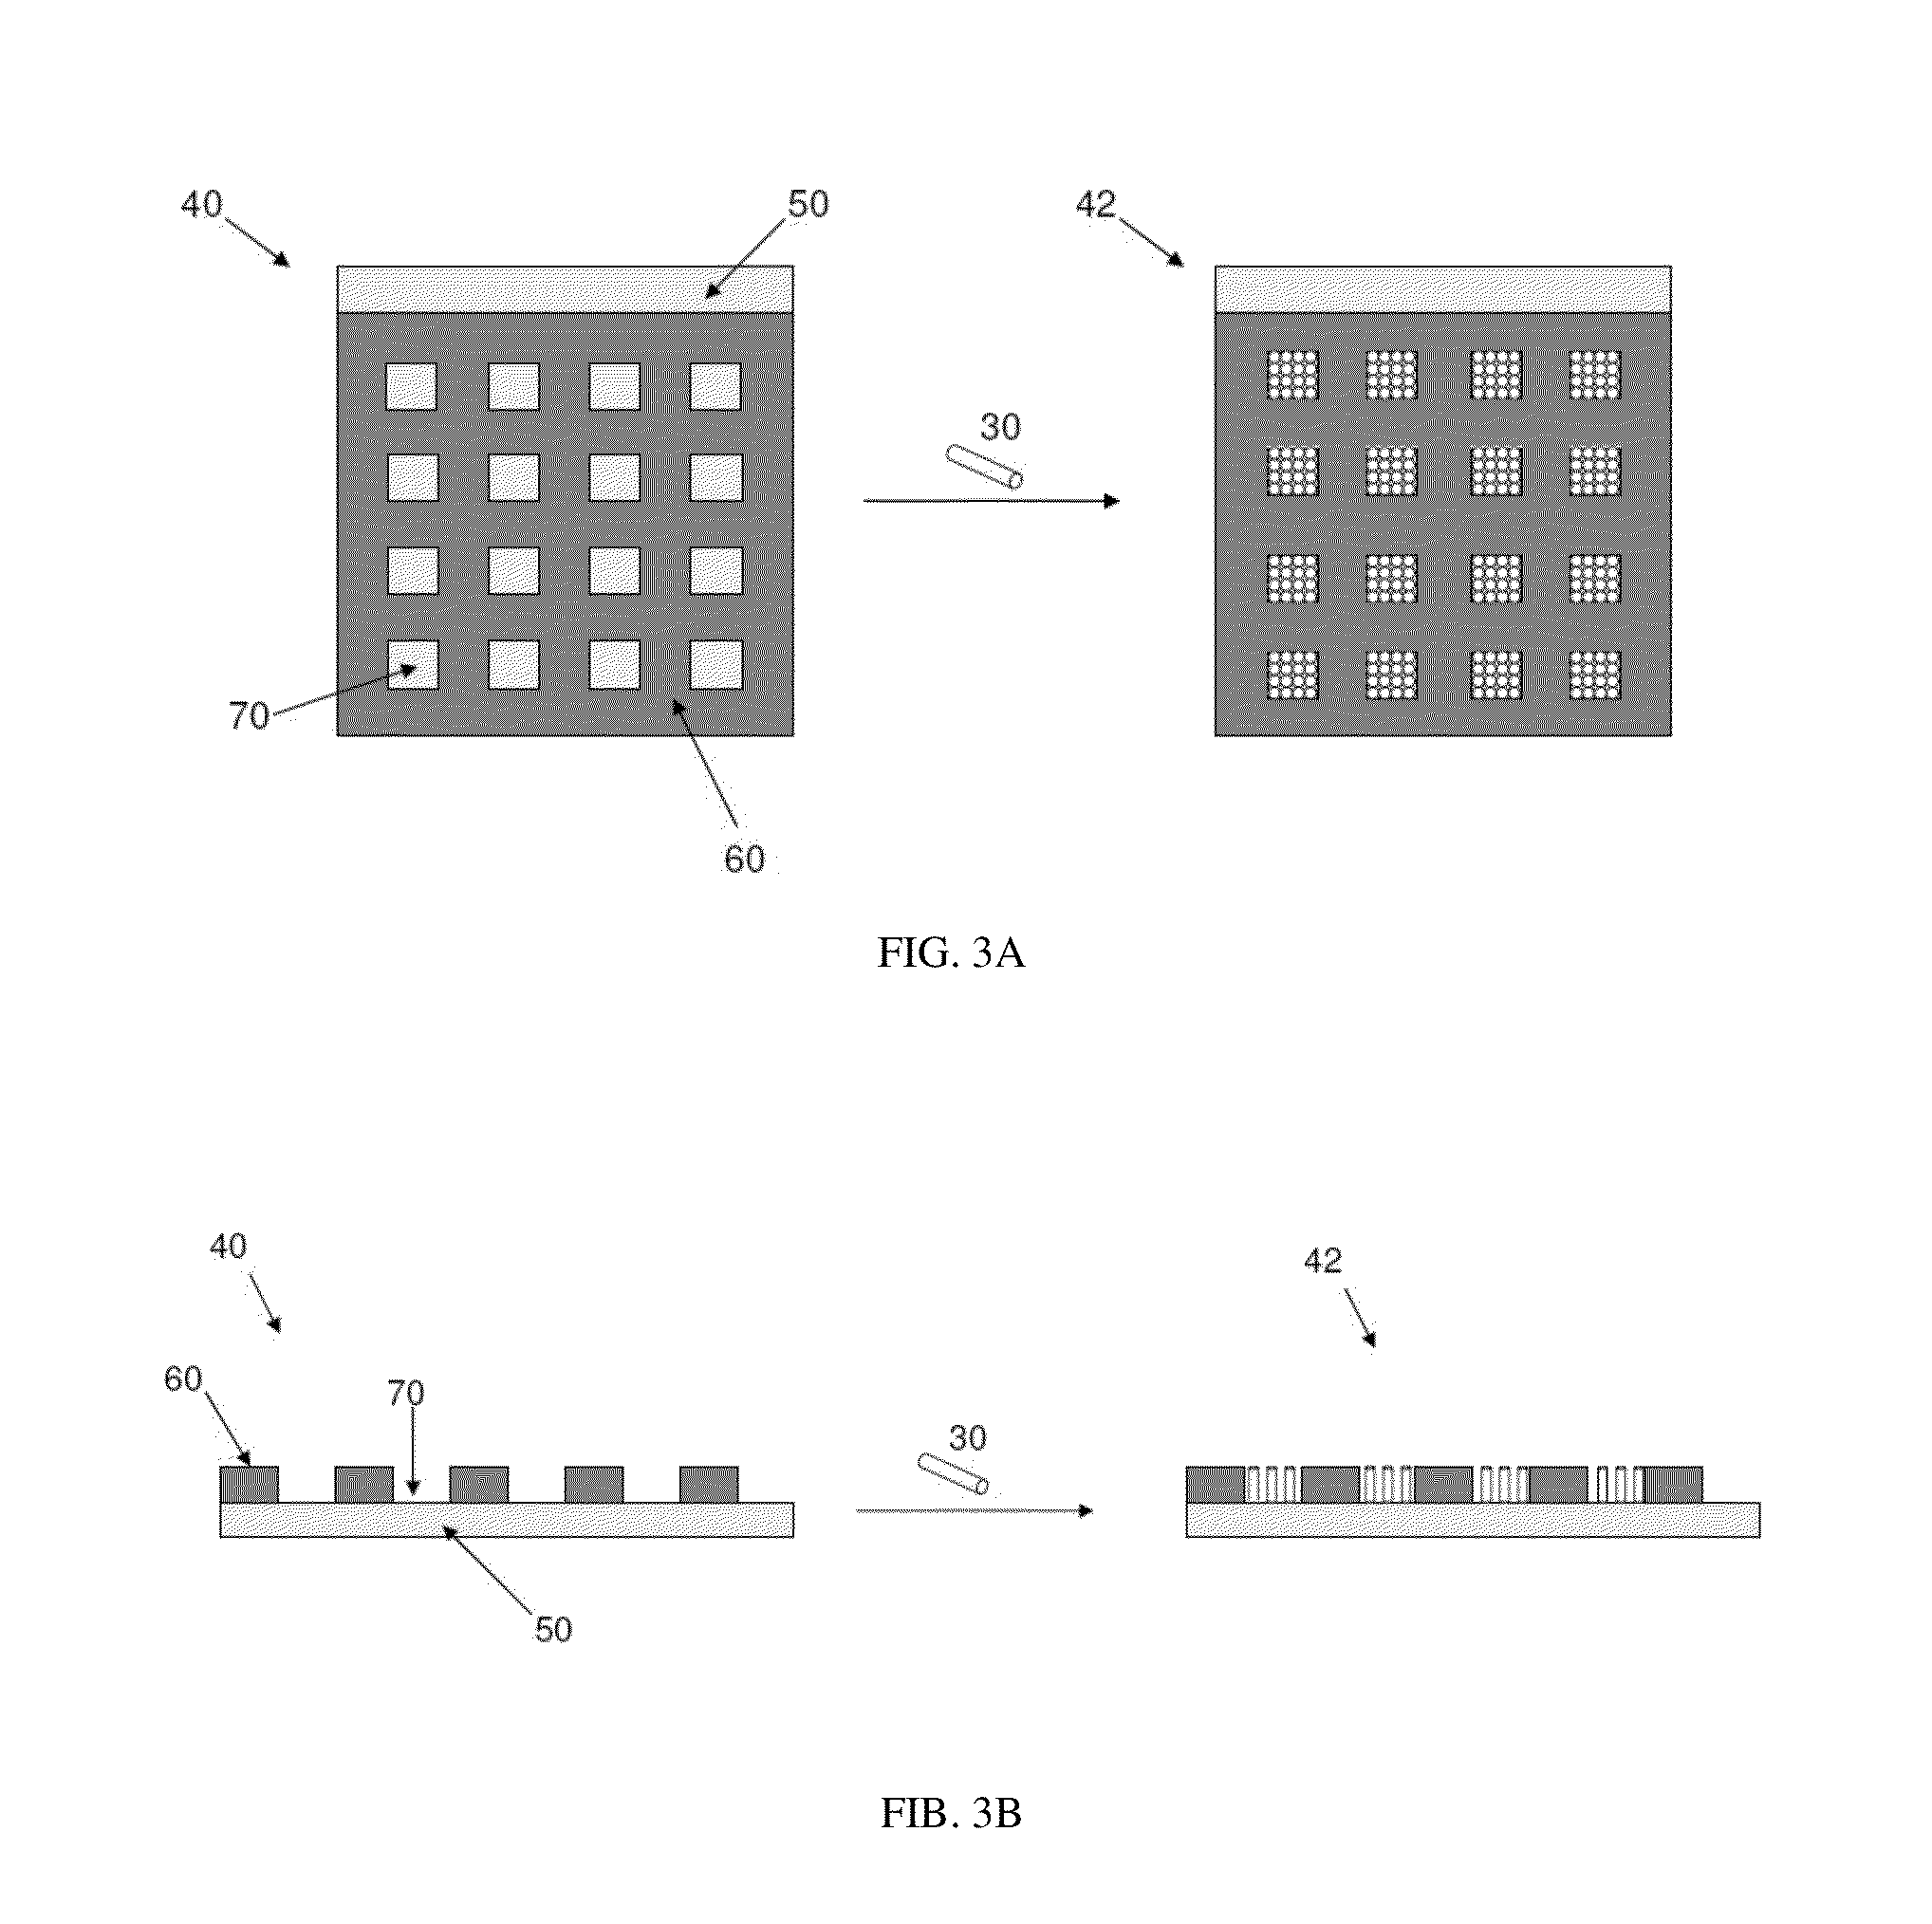 Field emission devices including nanotubes or other nanoscale articles